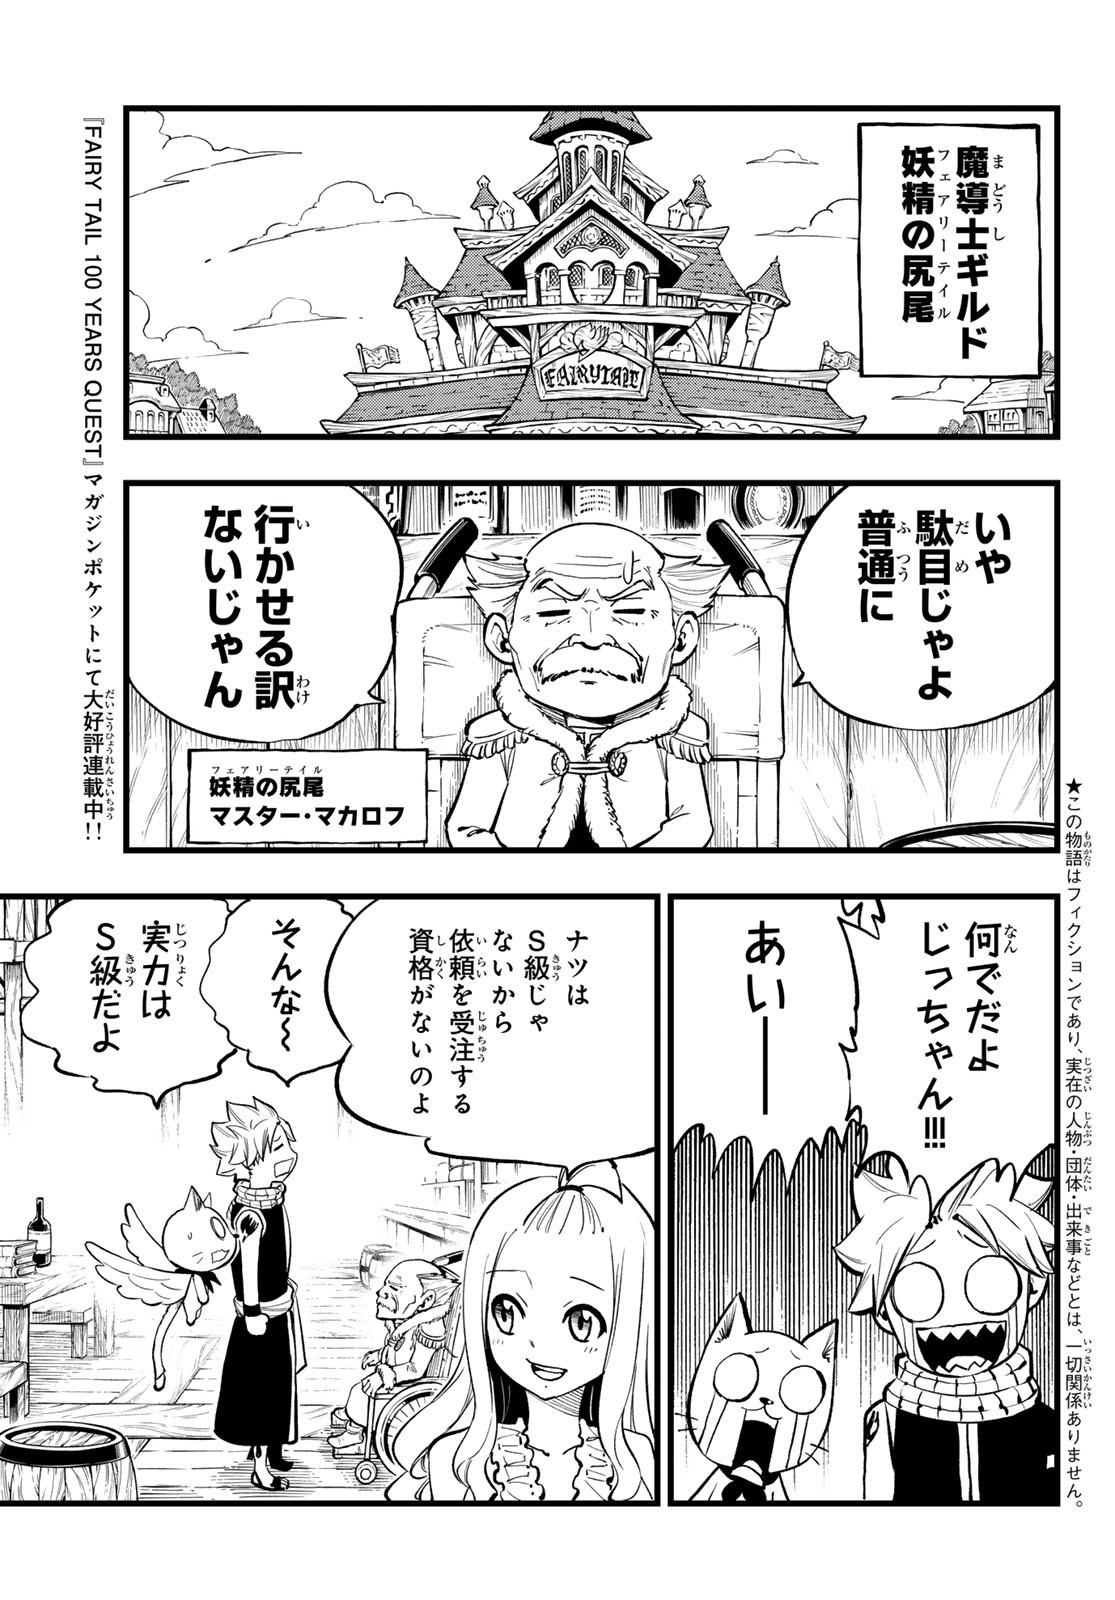 Weekly Shōnen Magazine - 週刊少年マガジン - Chapter 2024-31 - Page 14